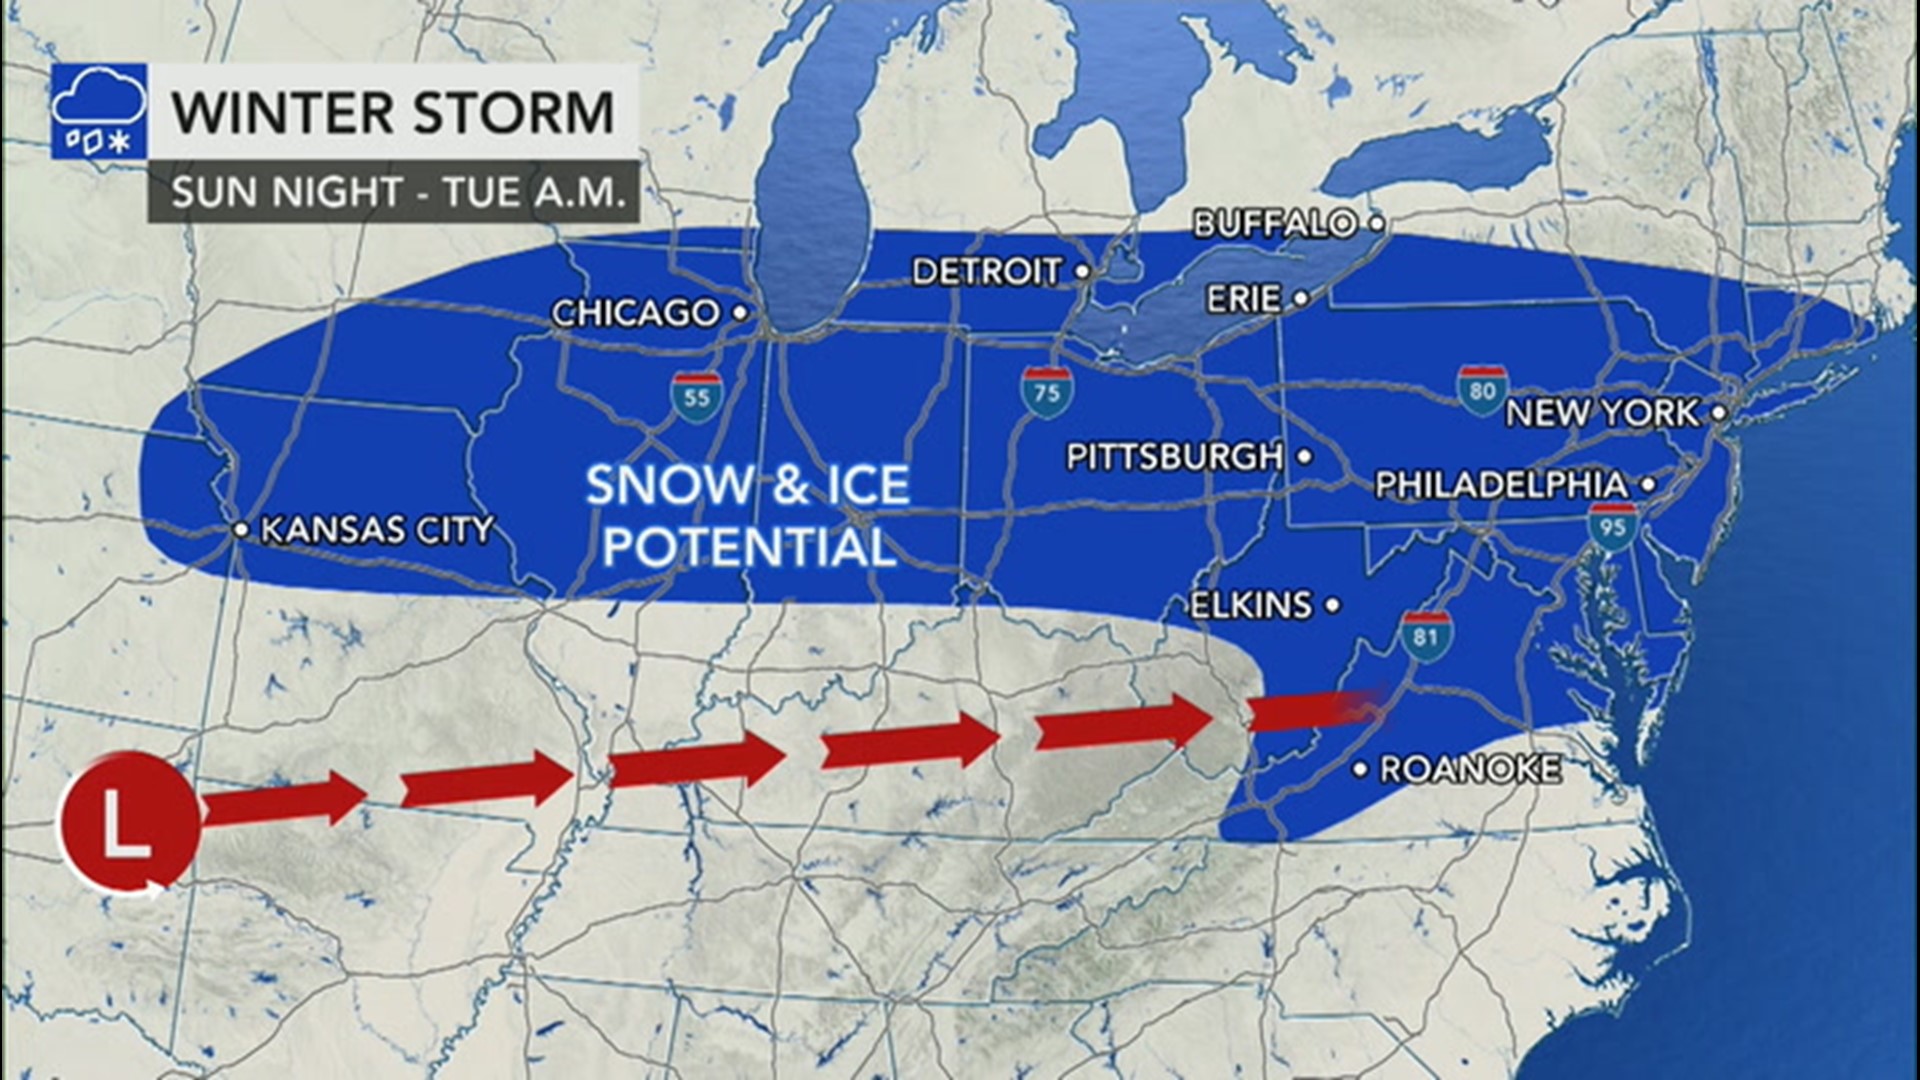 Winter storms could wallop the Midwest and eastern US next week